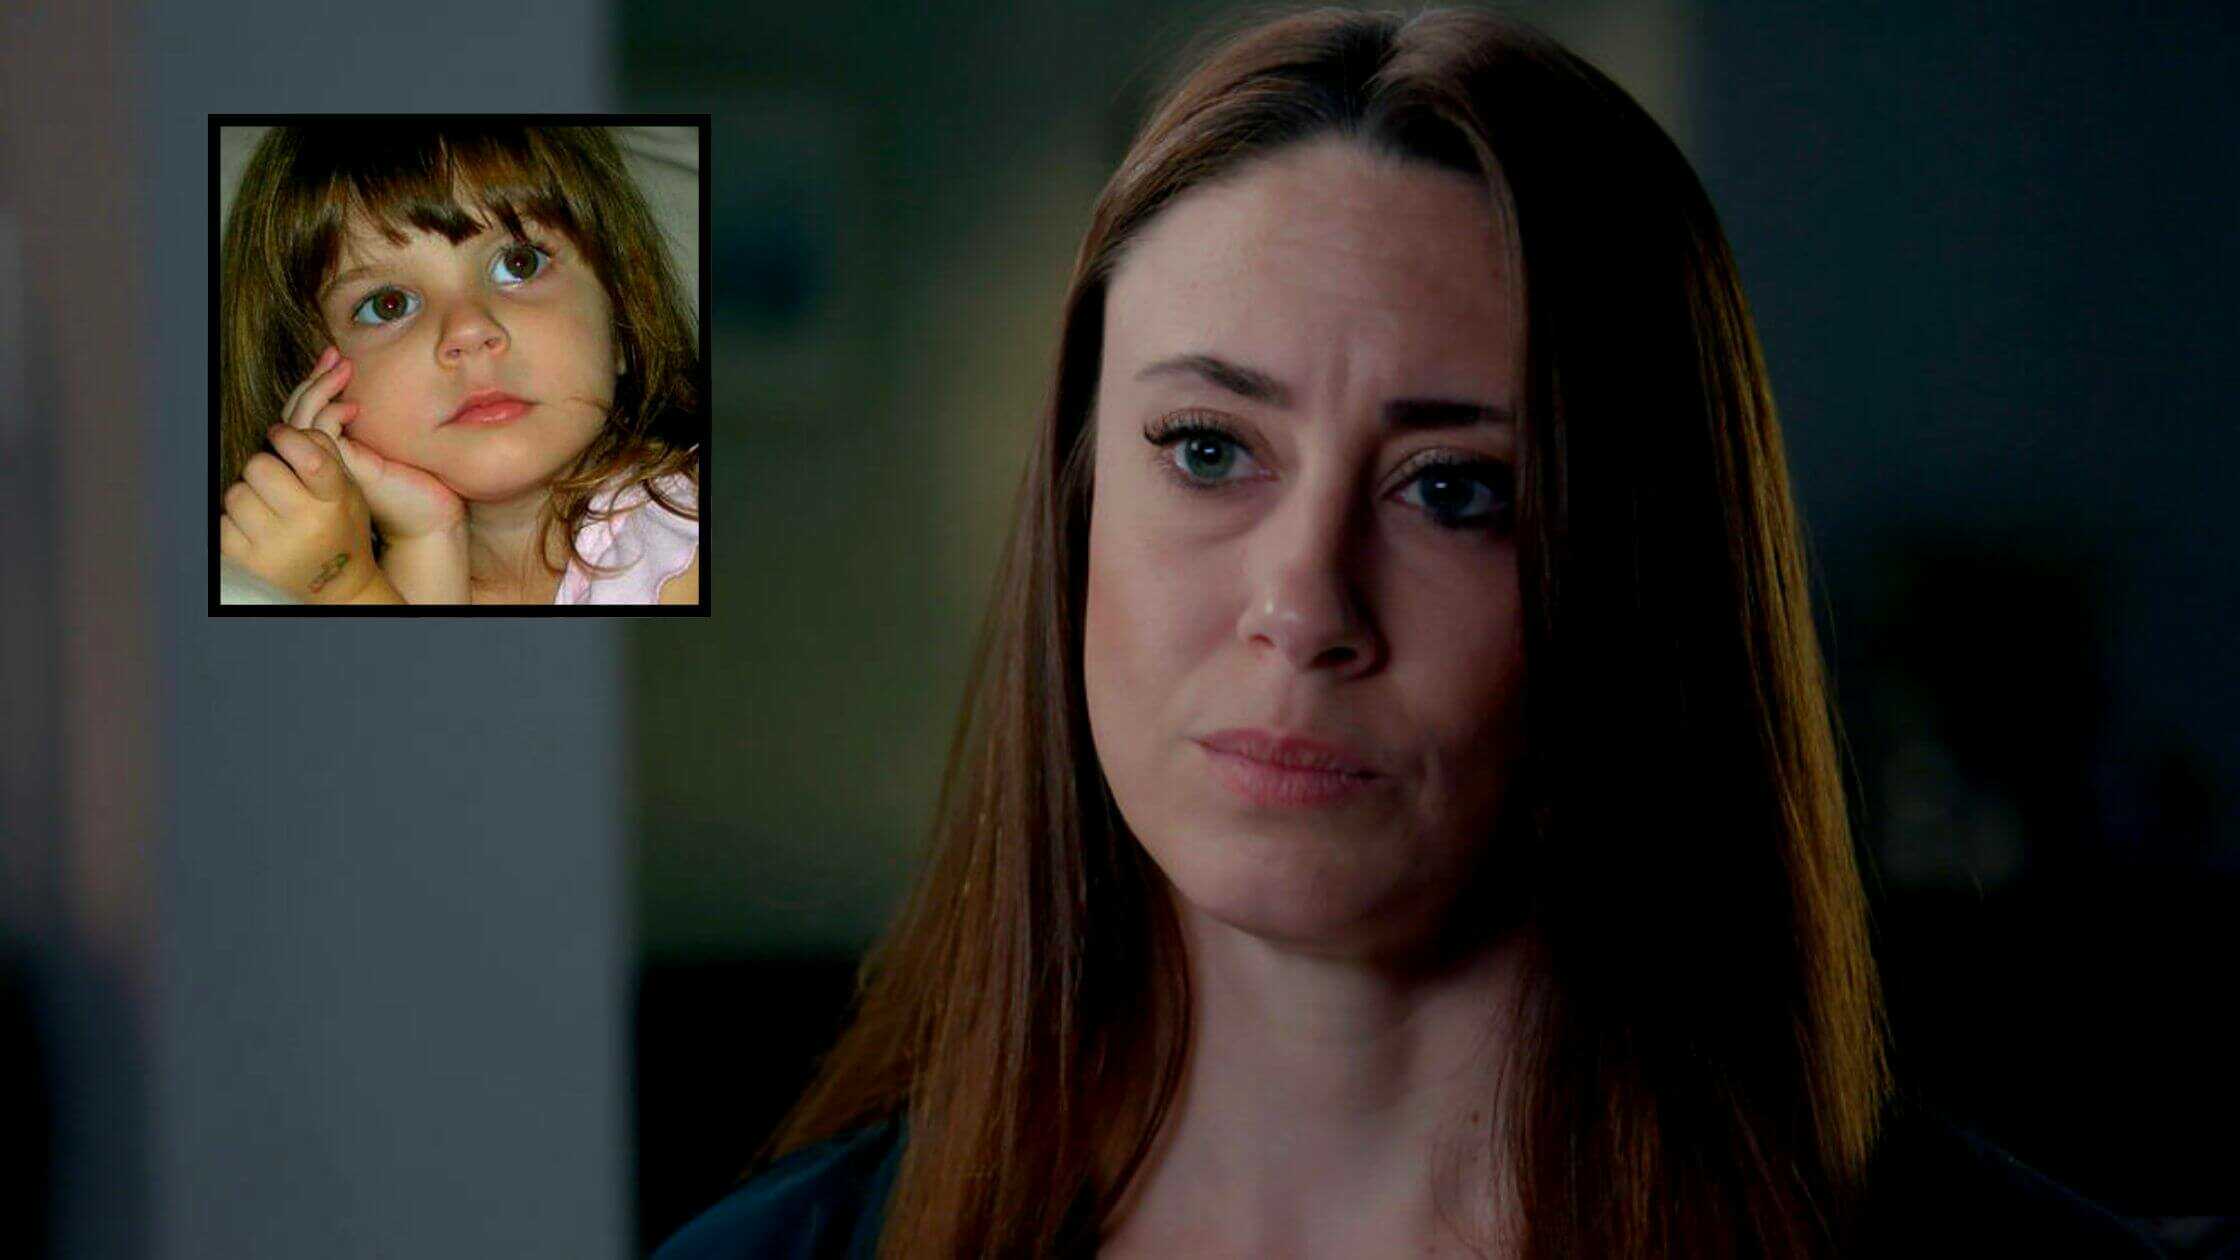 The New Casey Anthony Documentary Is Creating A Stir On The Internet